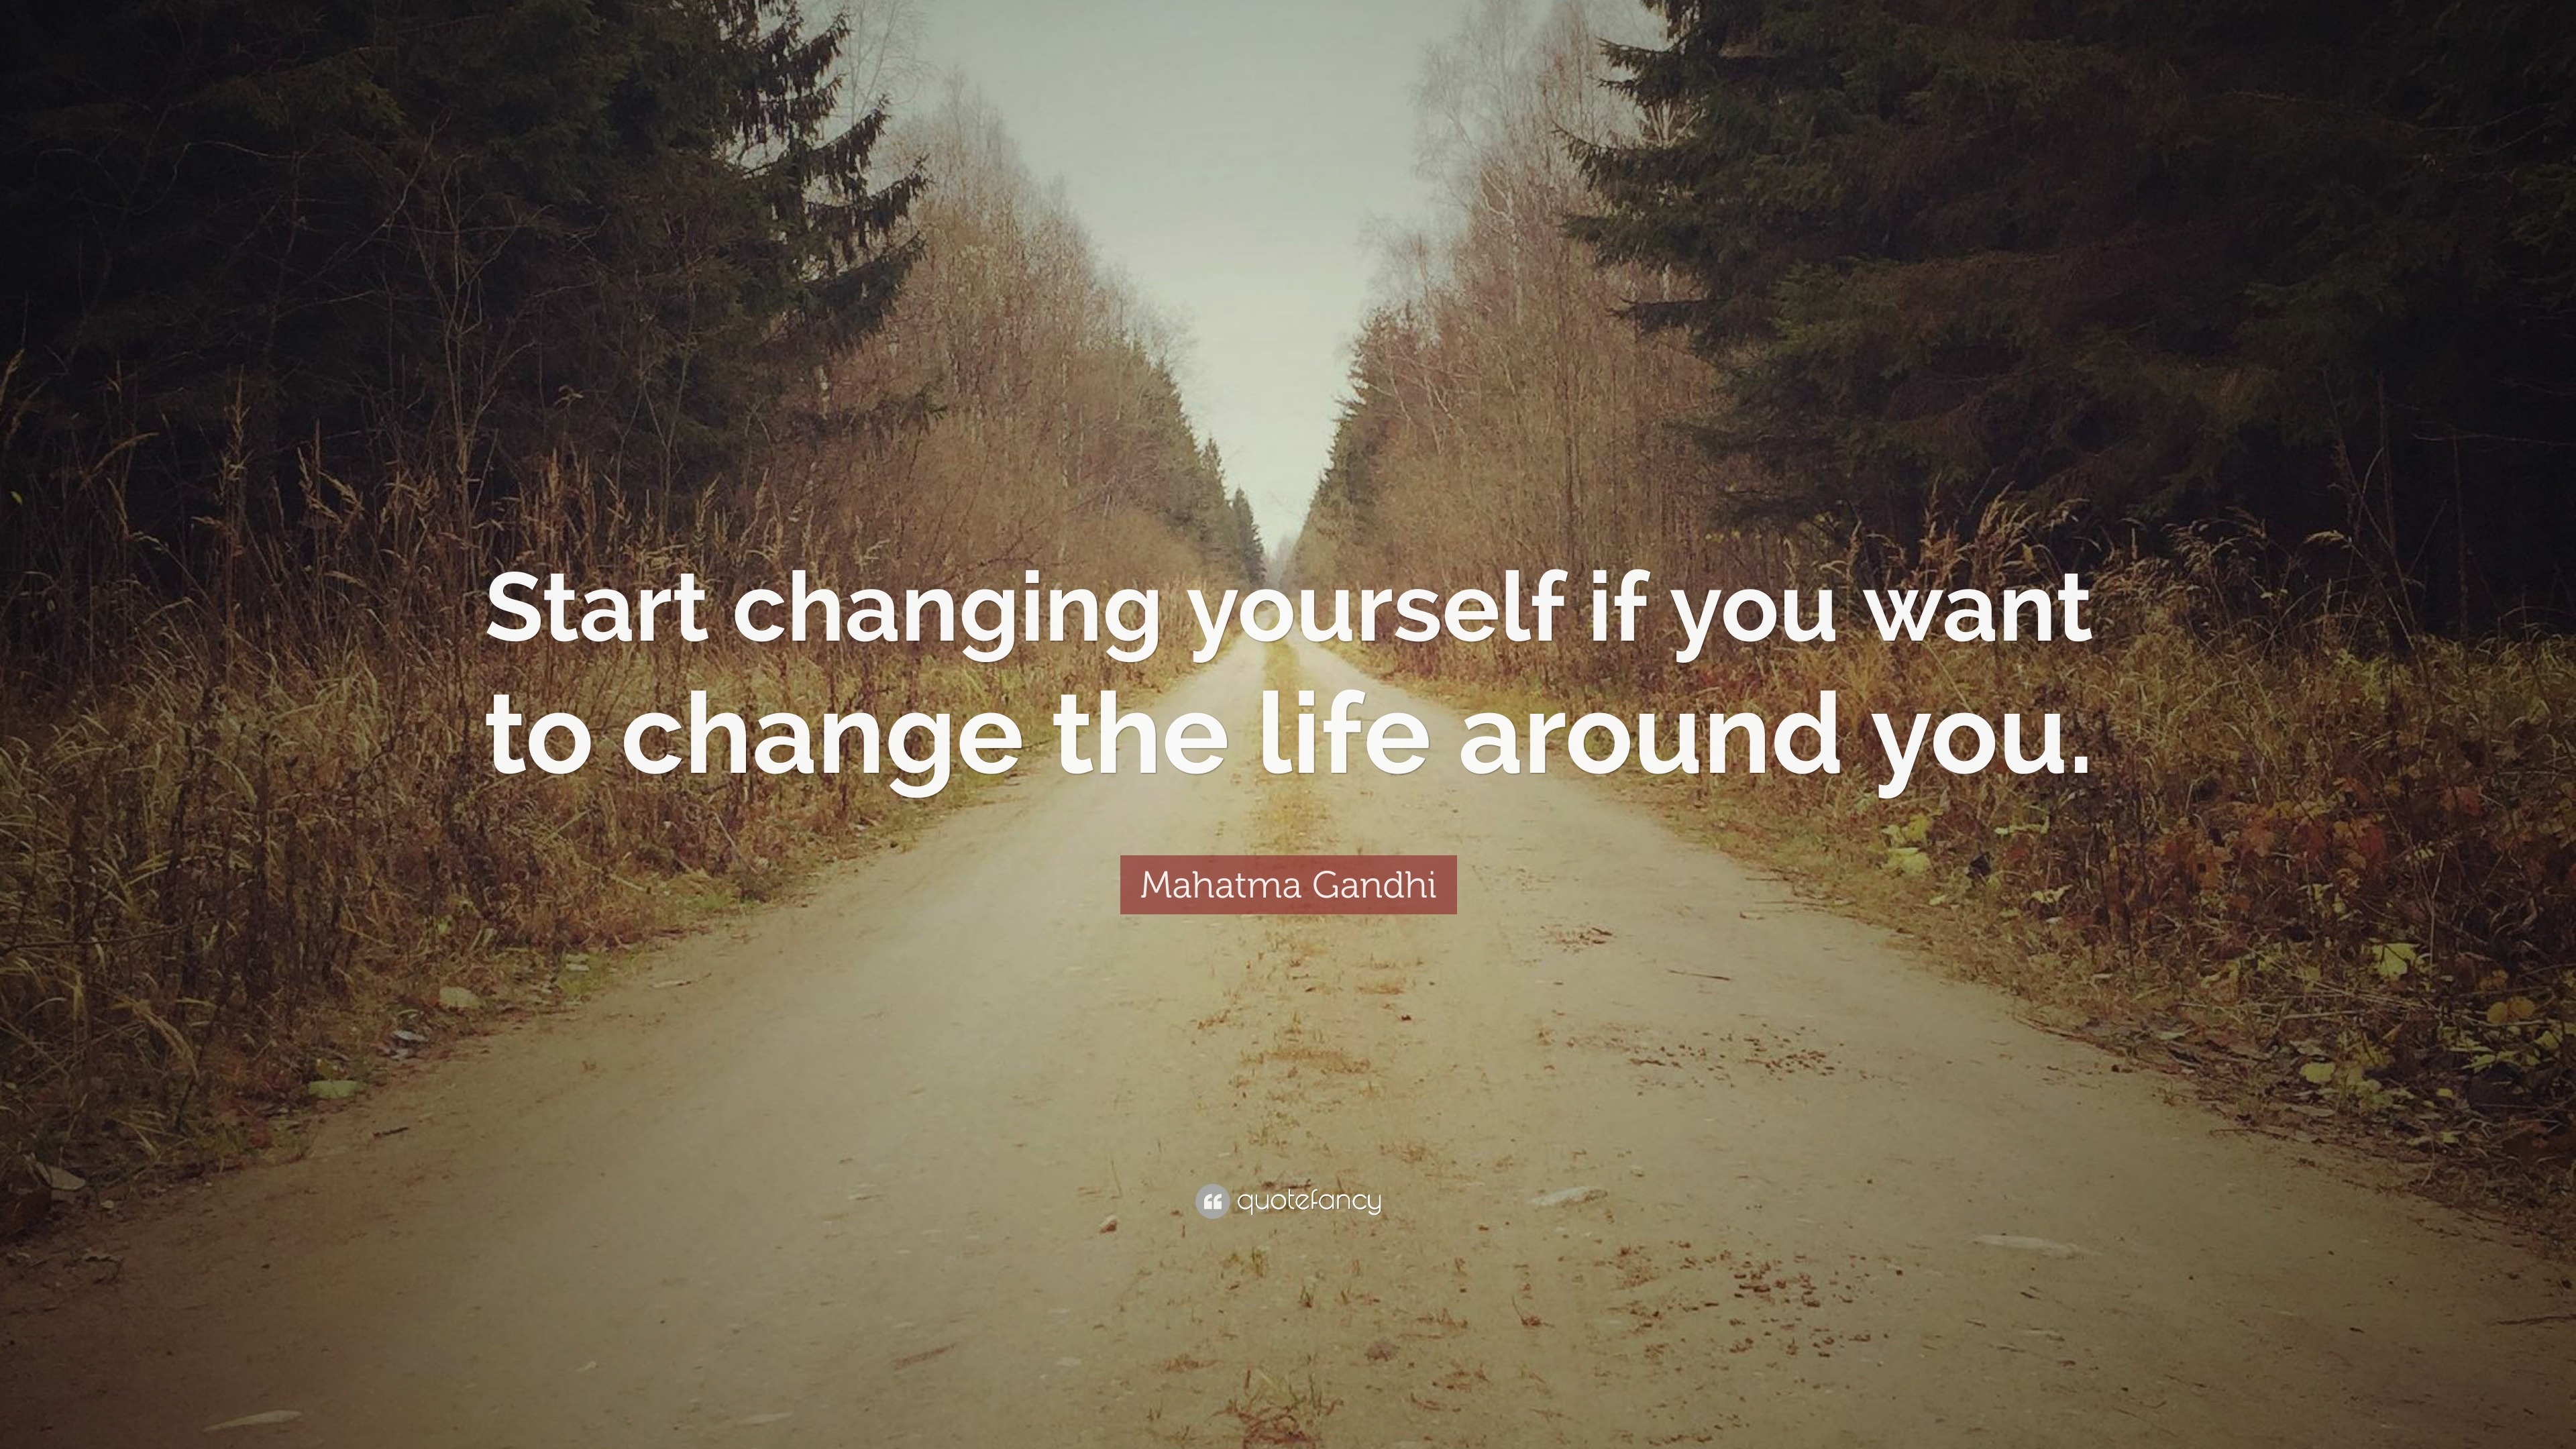 Mahatma Gandhi Quote “start Changing Yourself If You Want To Change